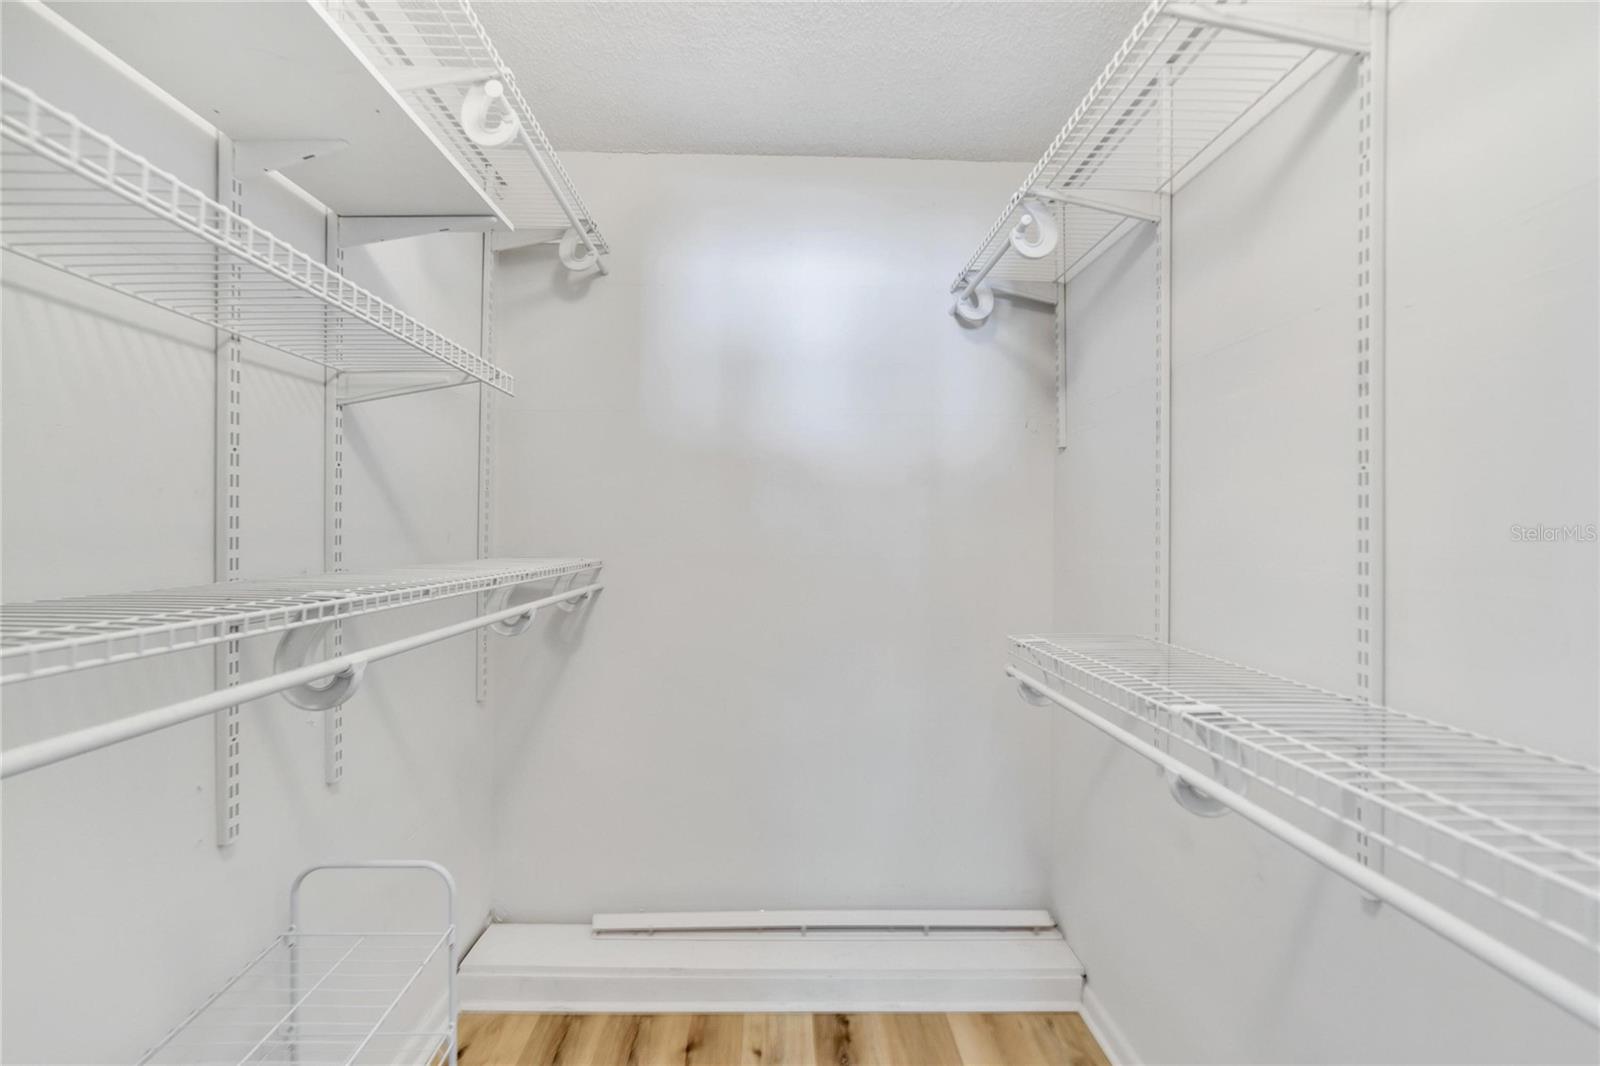 Large walk-in closet so you never have to decide between space and fashion.